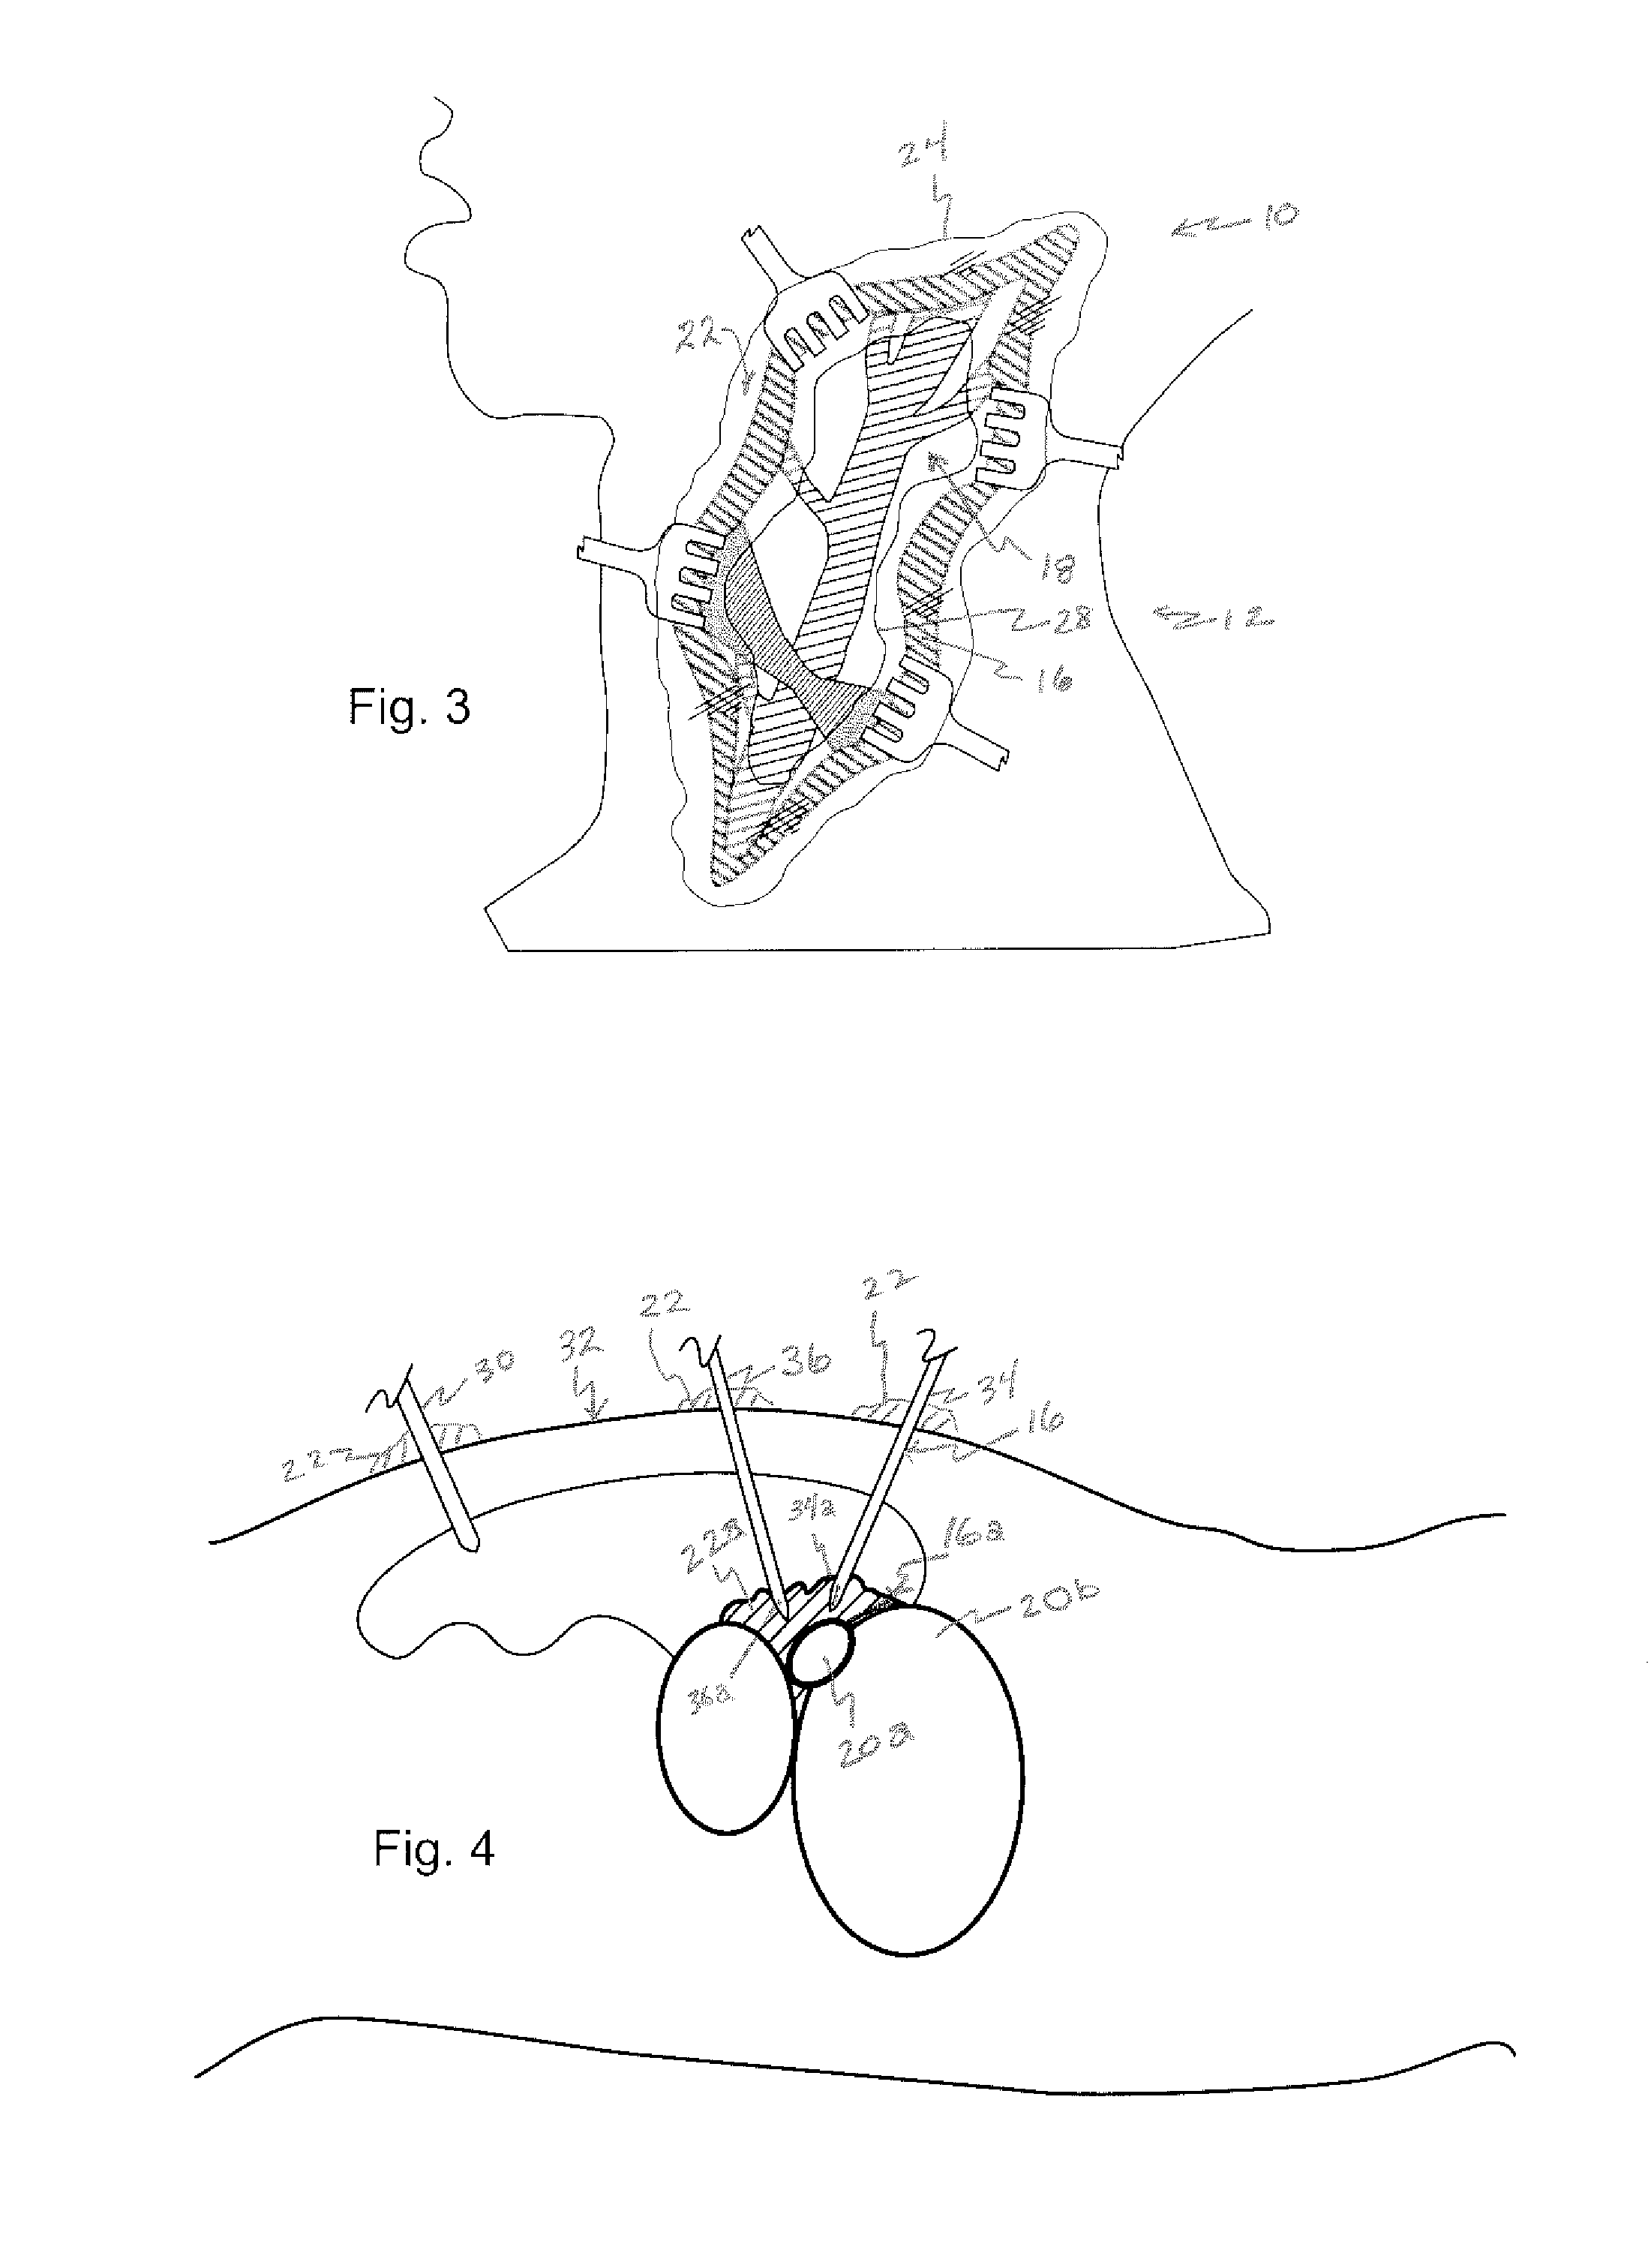 Method of inhibiting the formation of adhesions and scar tissue and reducing blood loss